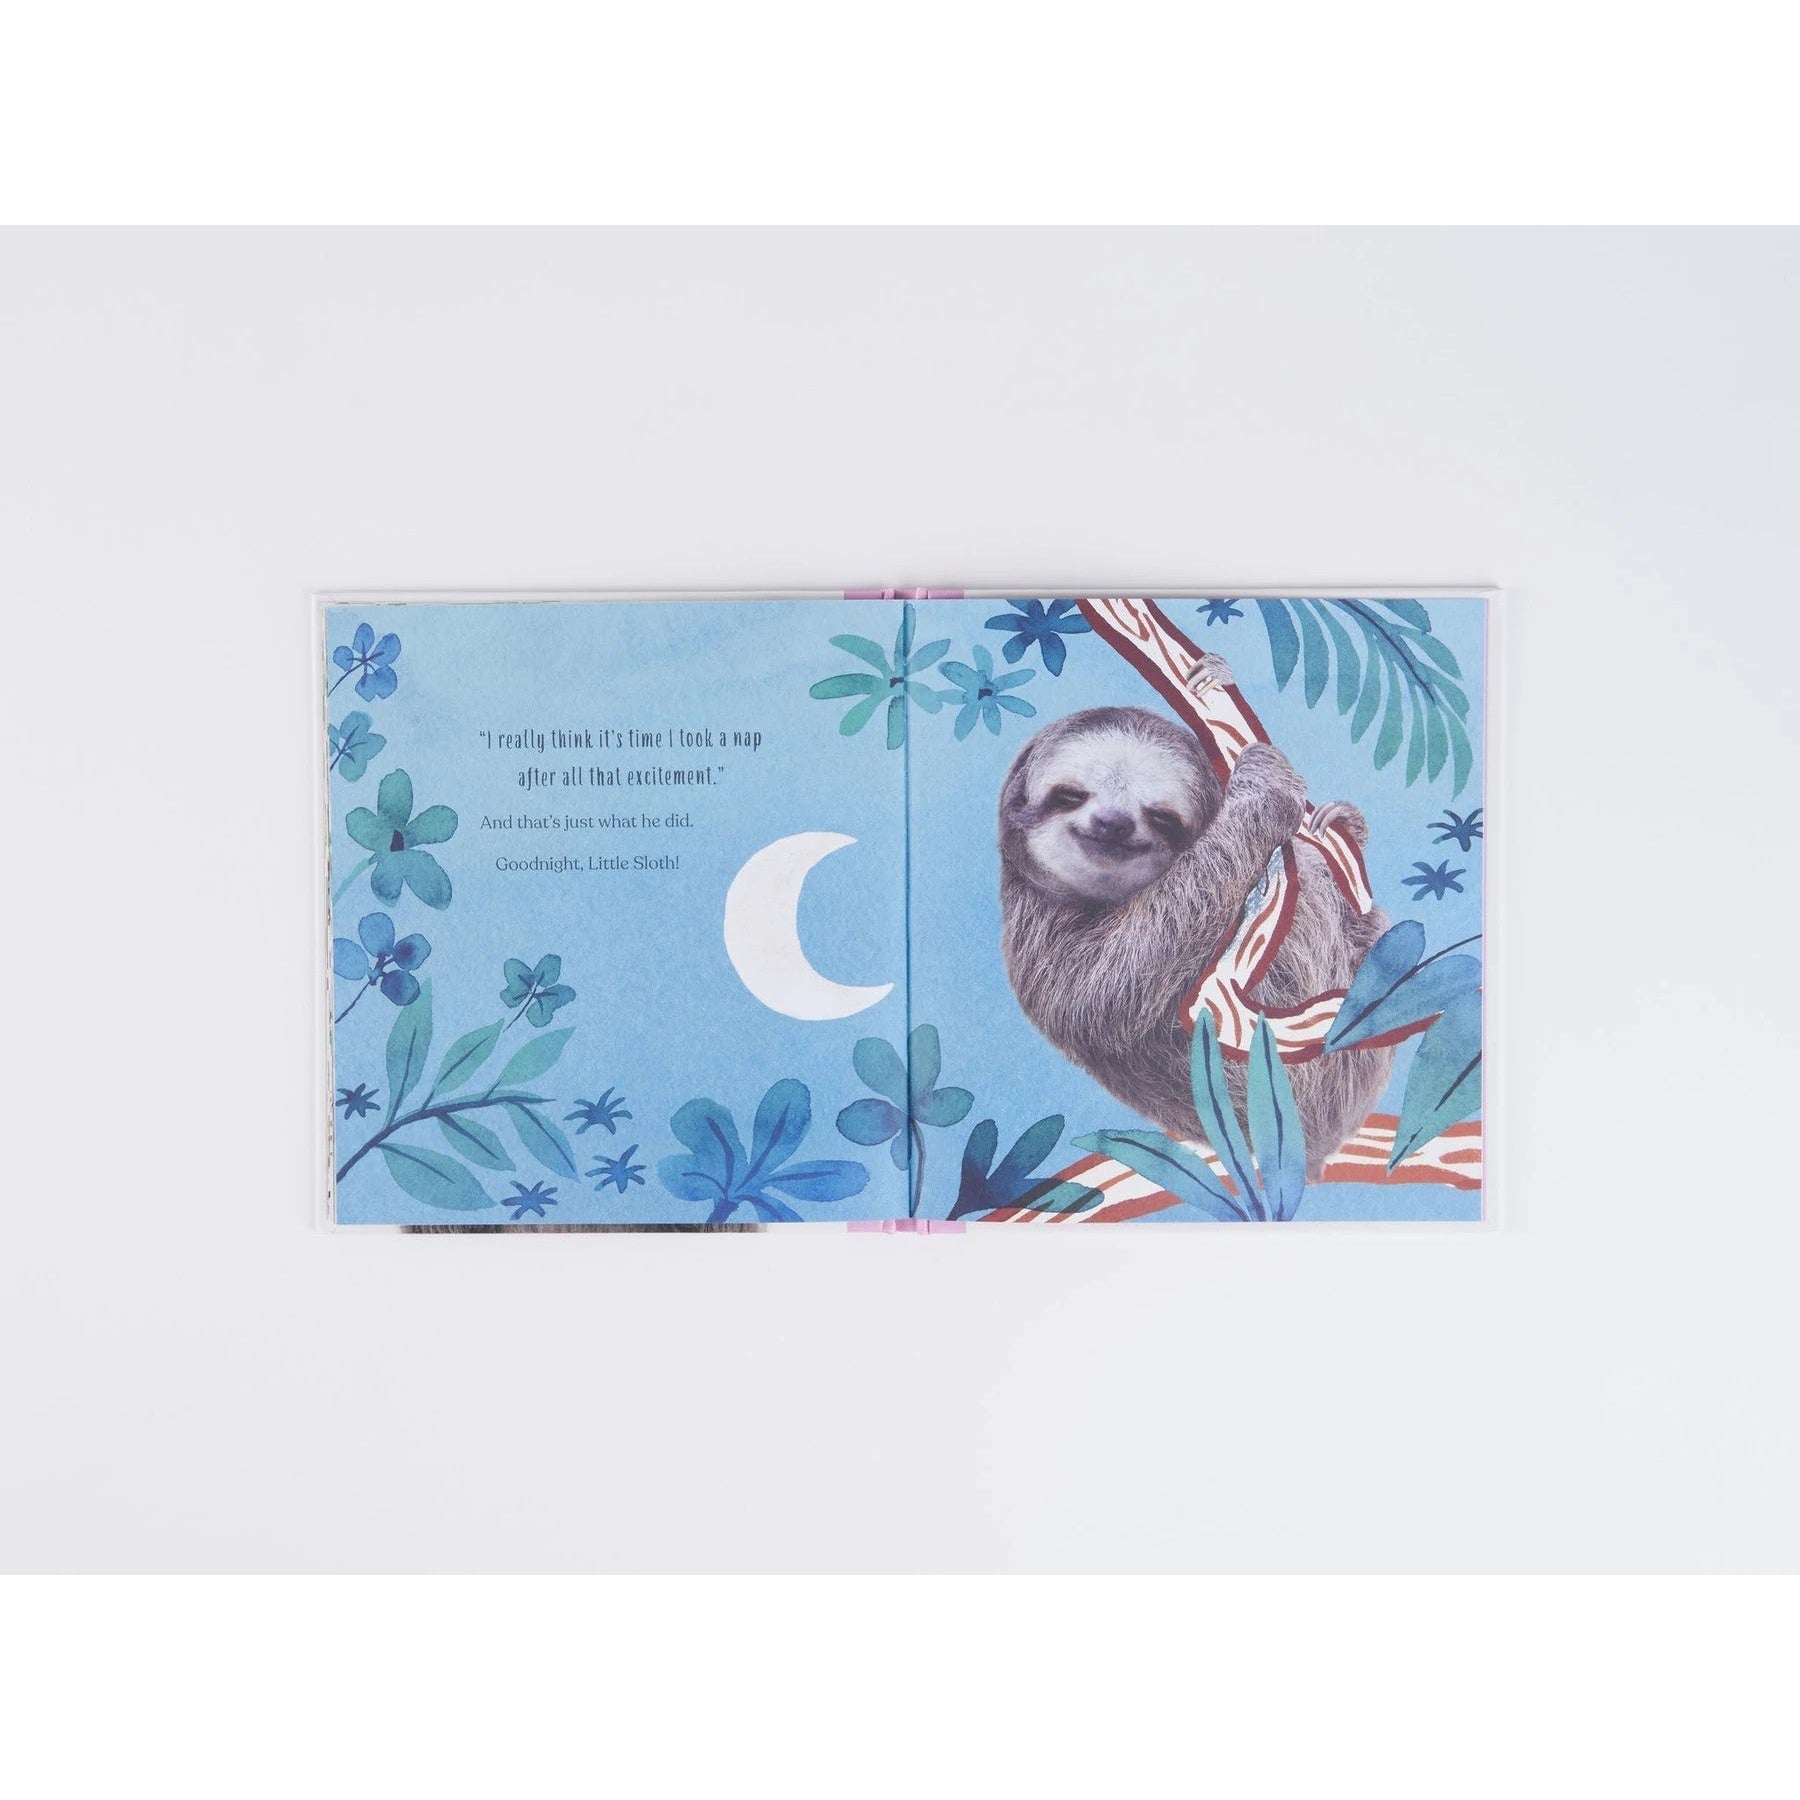 Goodnight Little Sloth : Simple Stories Sure to Soothe Your Little One to Sleep -Amanda Wood & Bec Winnel & Vikki Chu